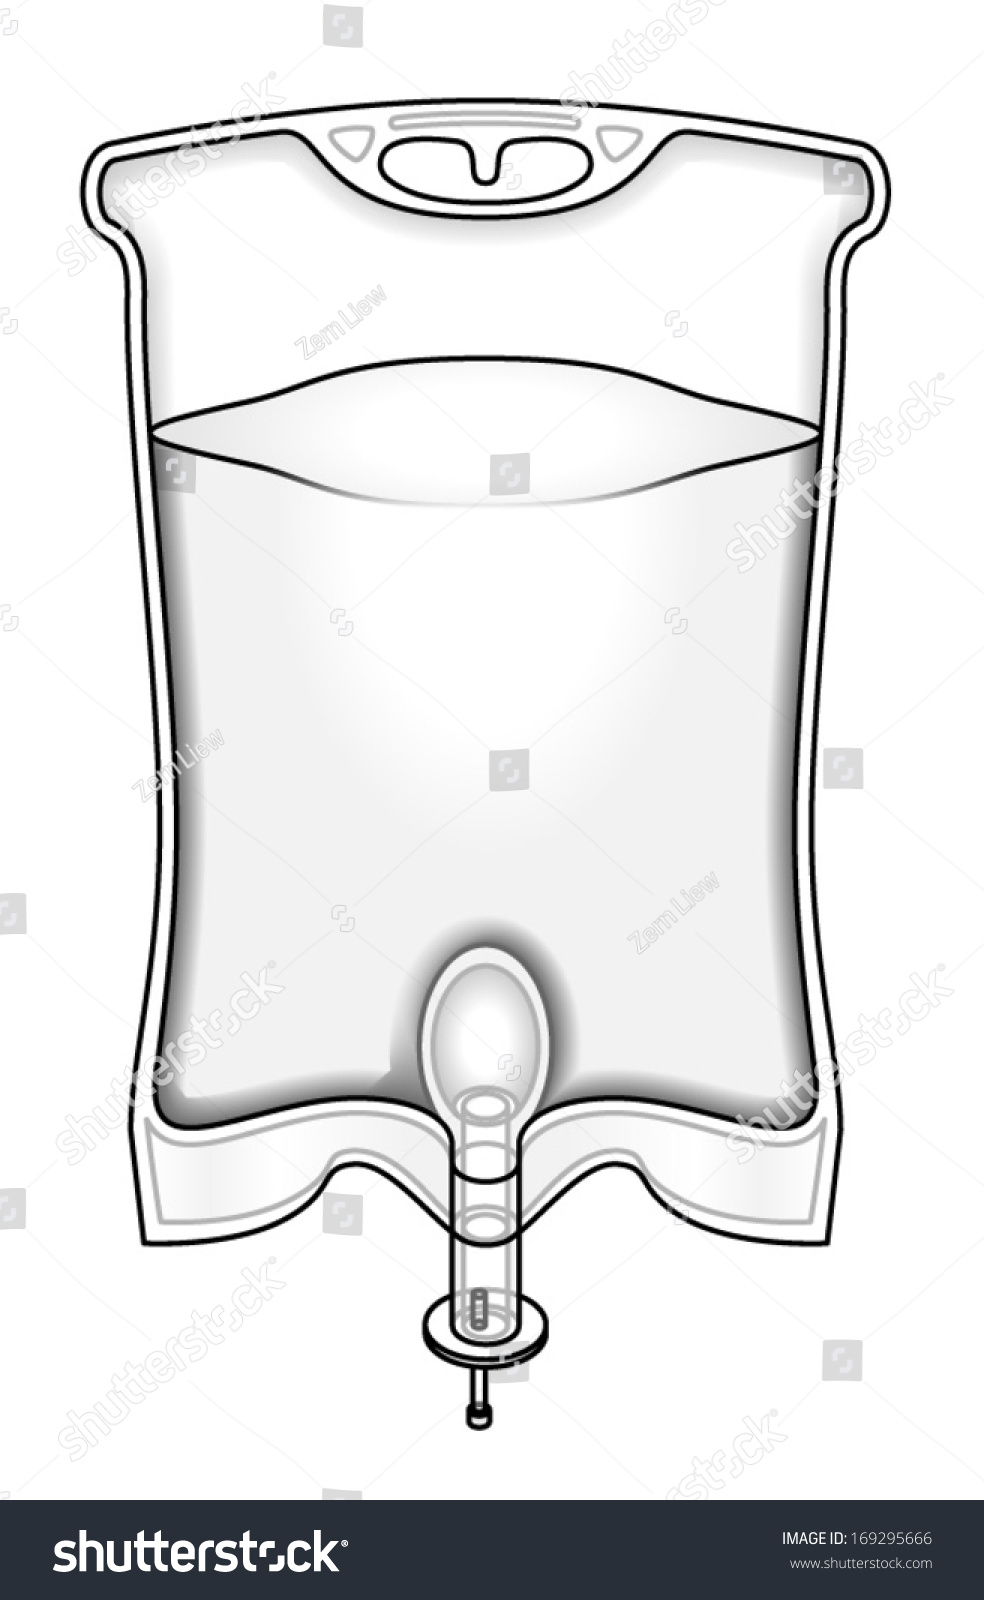 An Intravenous Iv Drip Fluid Bag Filled With Clear Liquid. Stock Vector